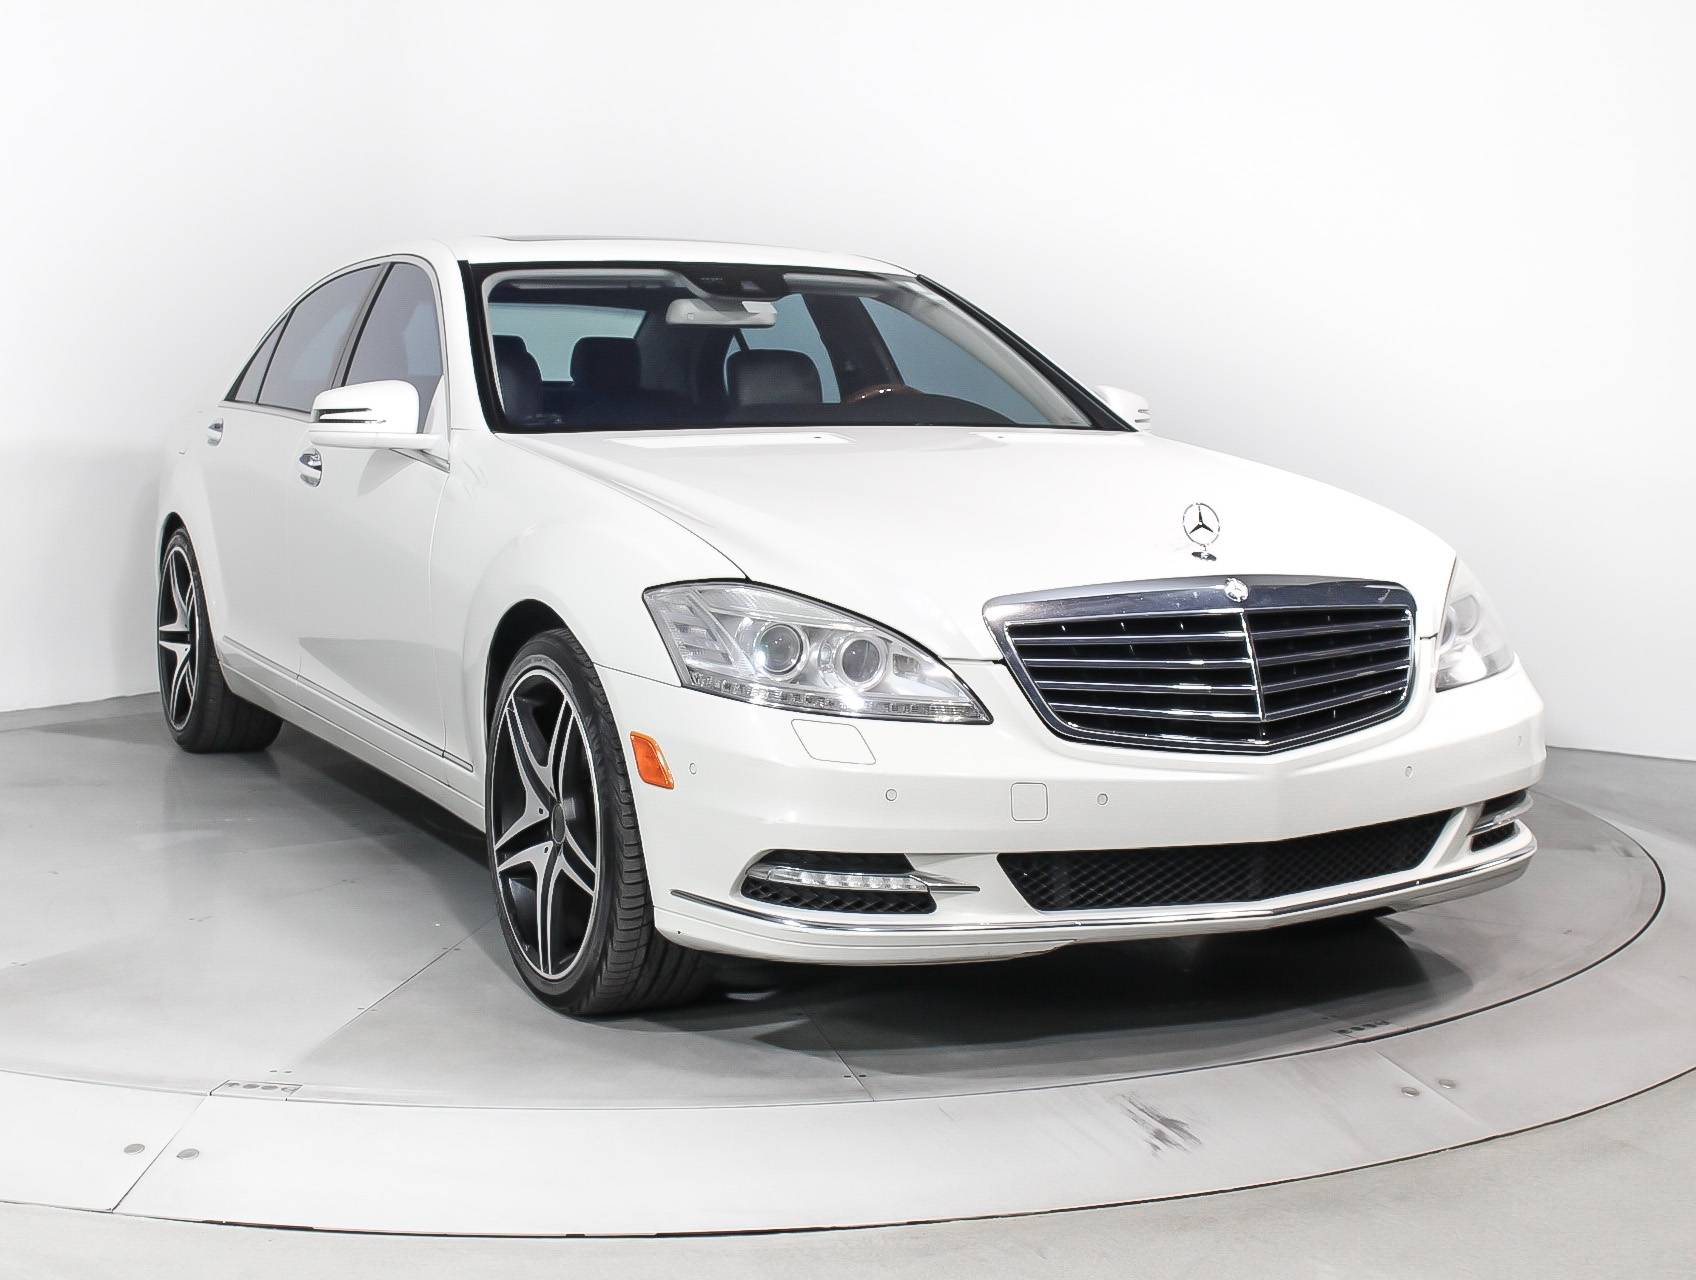 Florida Fine Cars - Used MERCEDES-BENZ S CLASS 2010 HOLLYWOOD S550